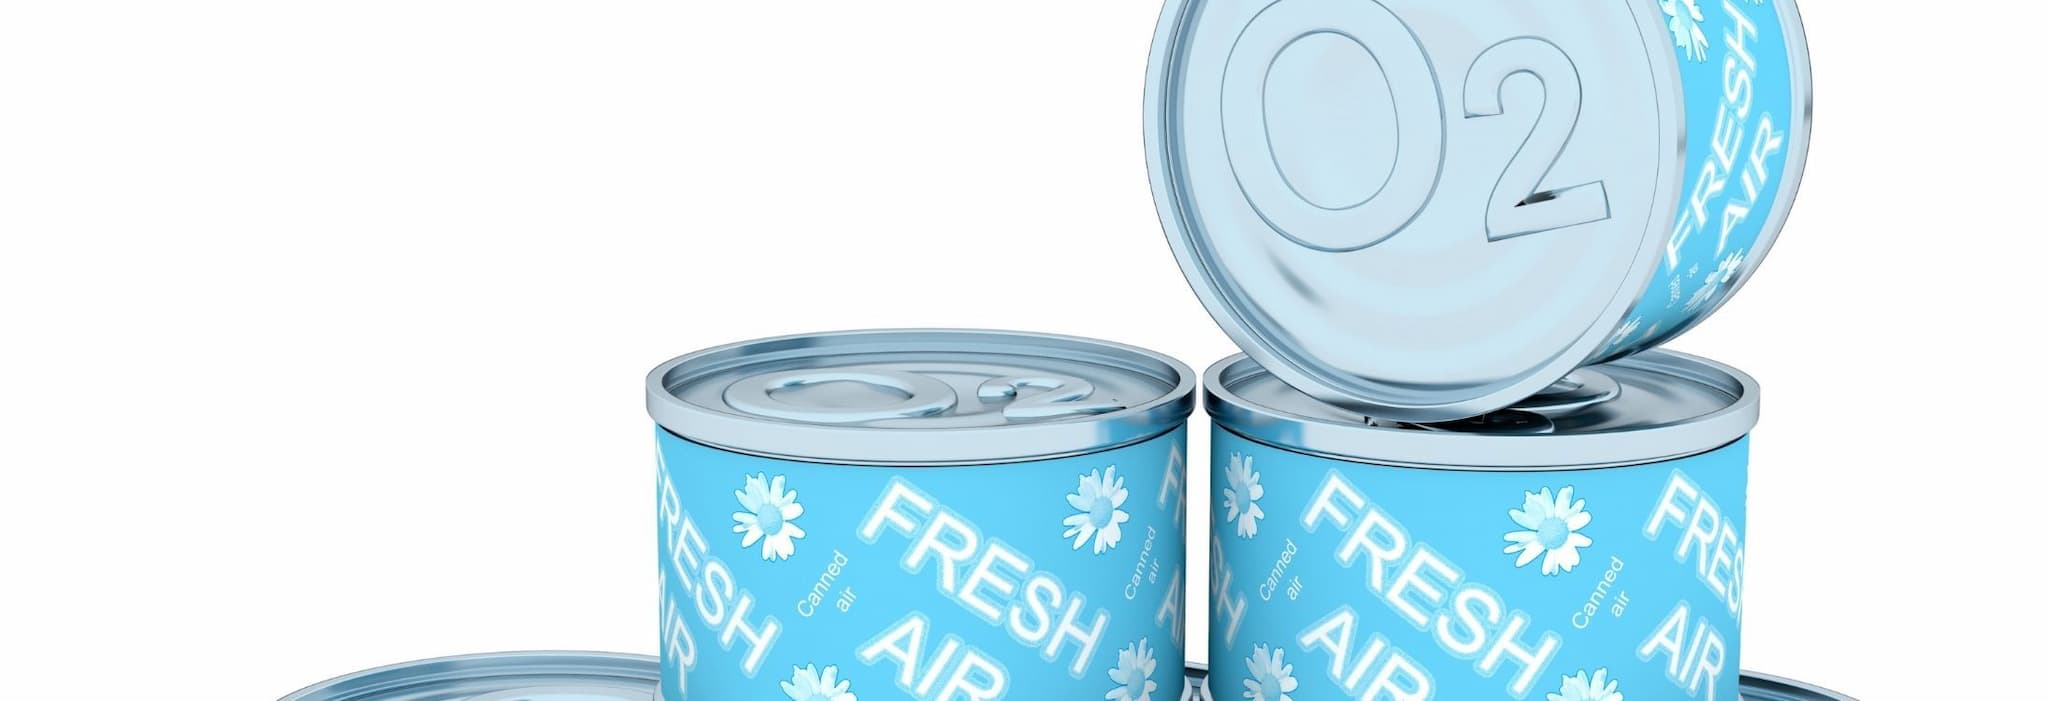 Canned Air